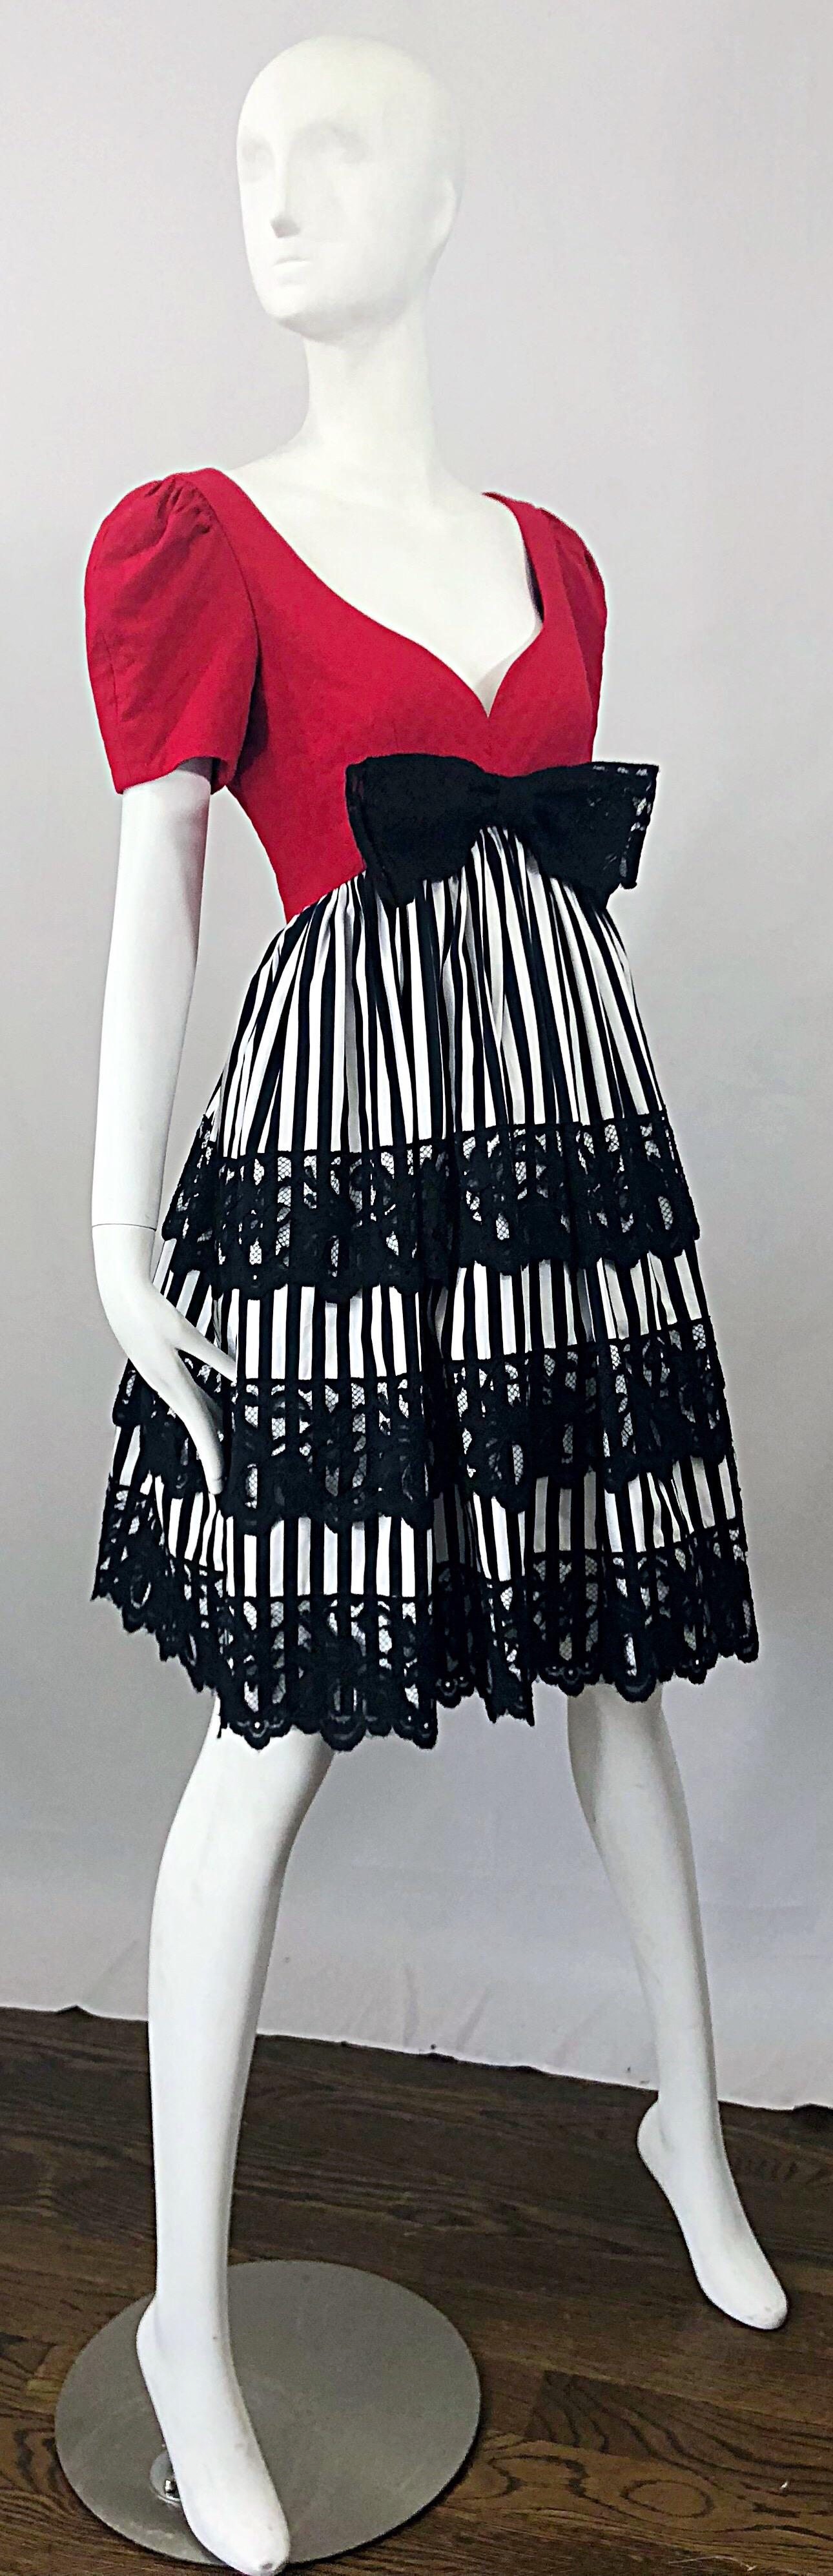 Vintage Adele Simpson 1980s Red Black White Fit n' Flare Empire Bow Lace Dress For Sale 5